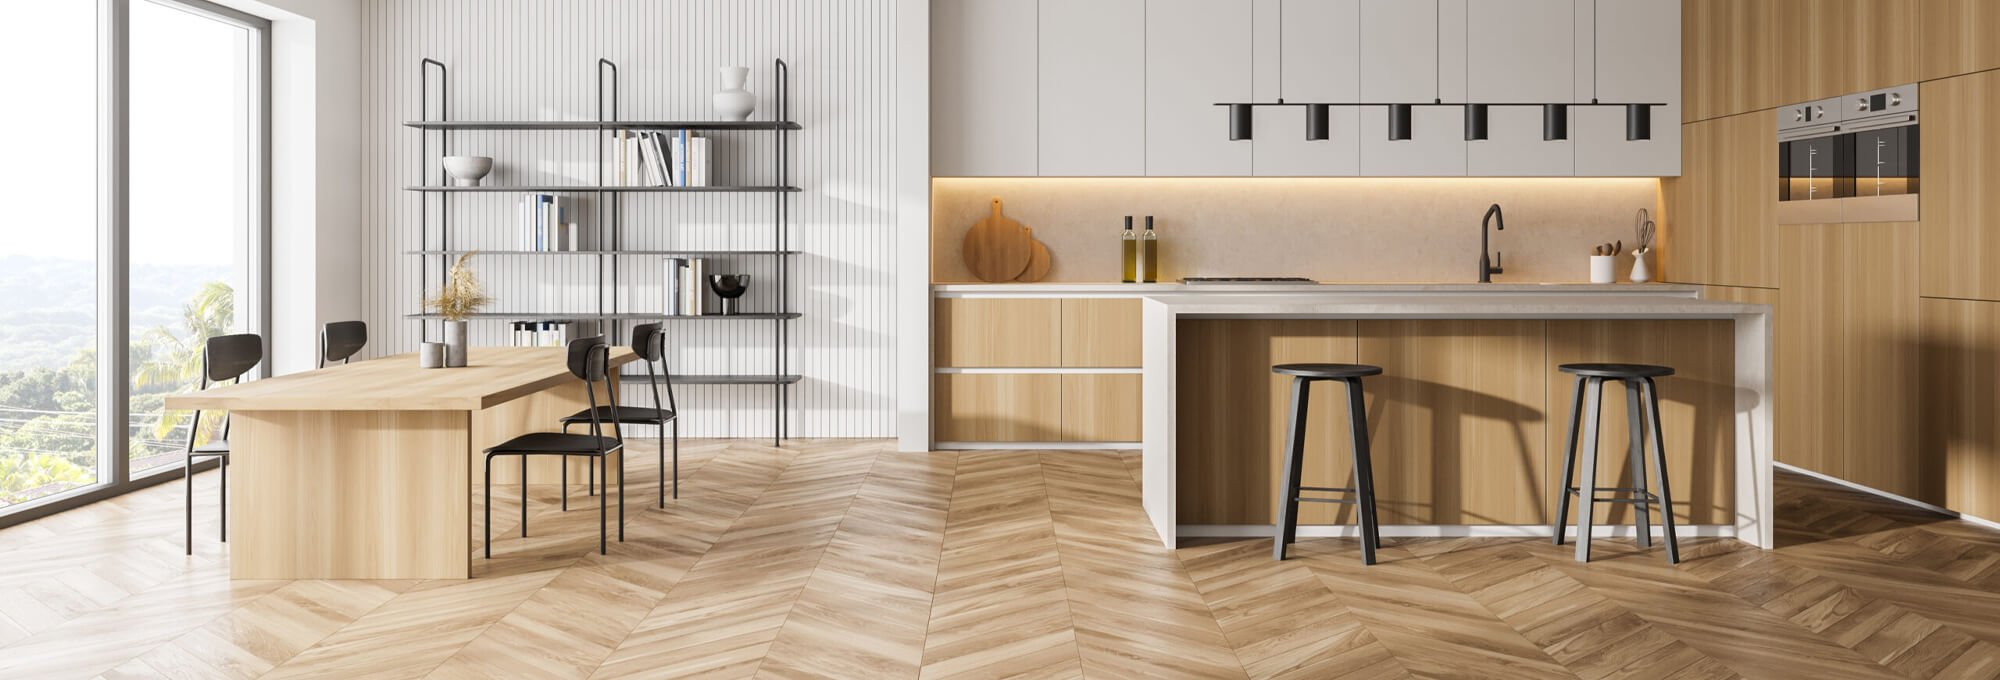 Shop Flooring Products from Northern Floor & Tile Service inTraverse City